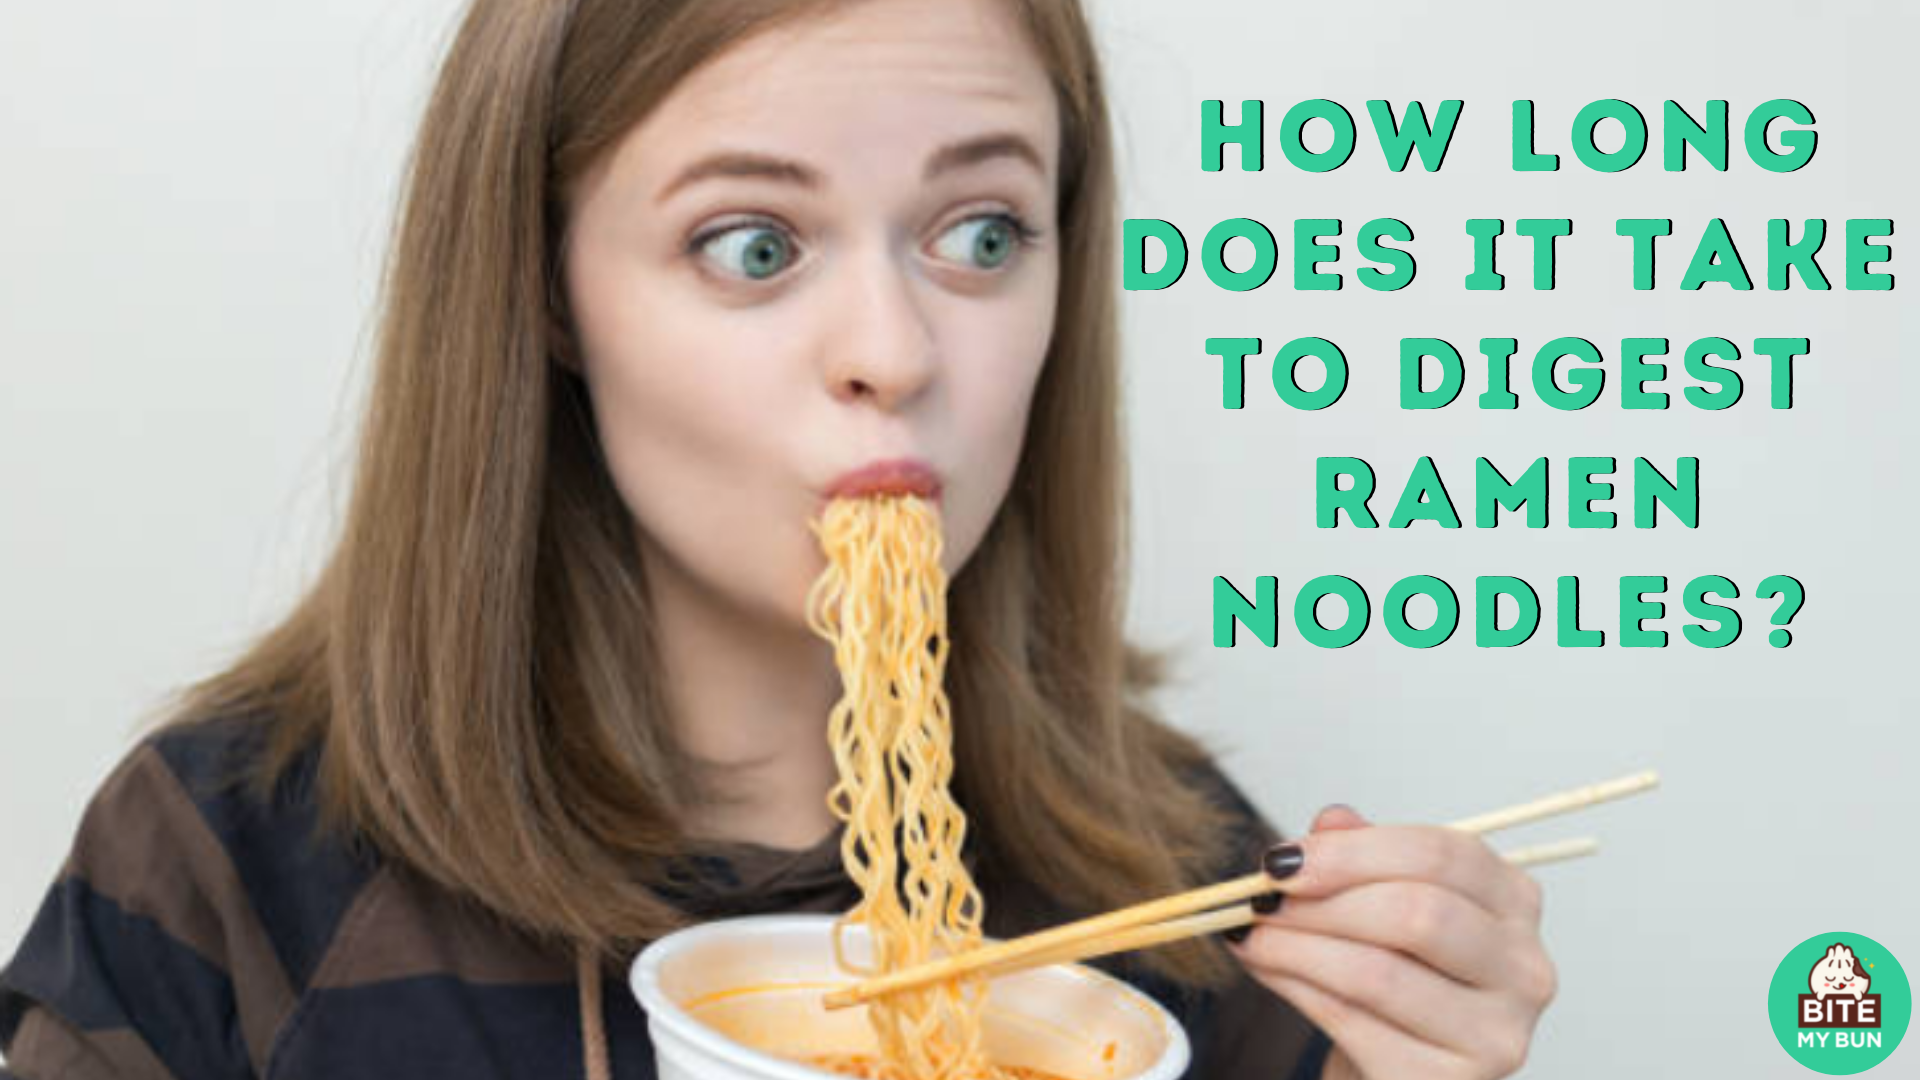 How long does it take to digest ramen noodles?